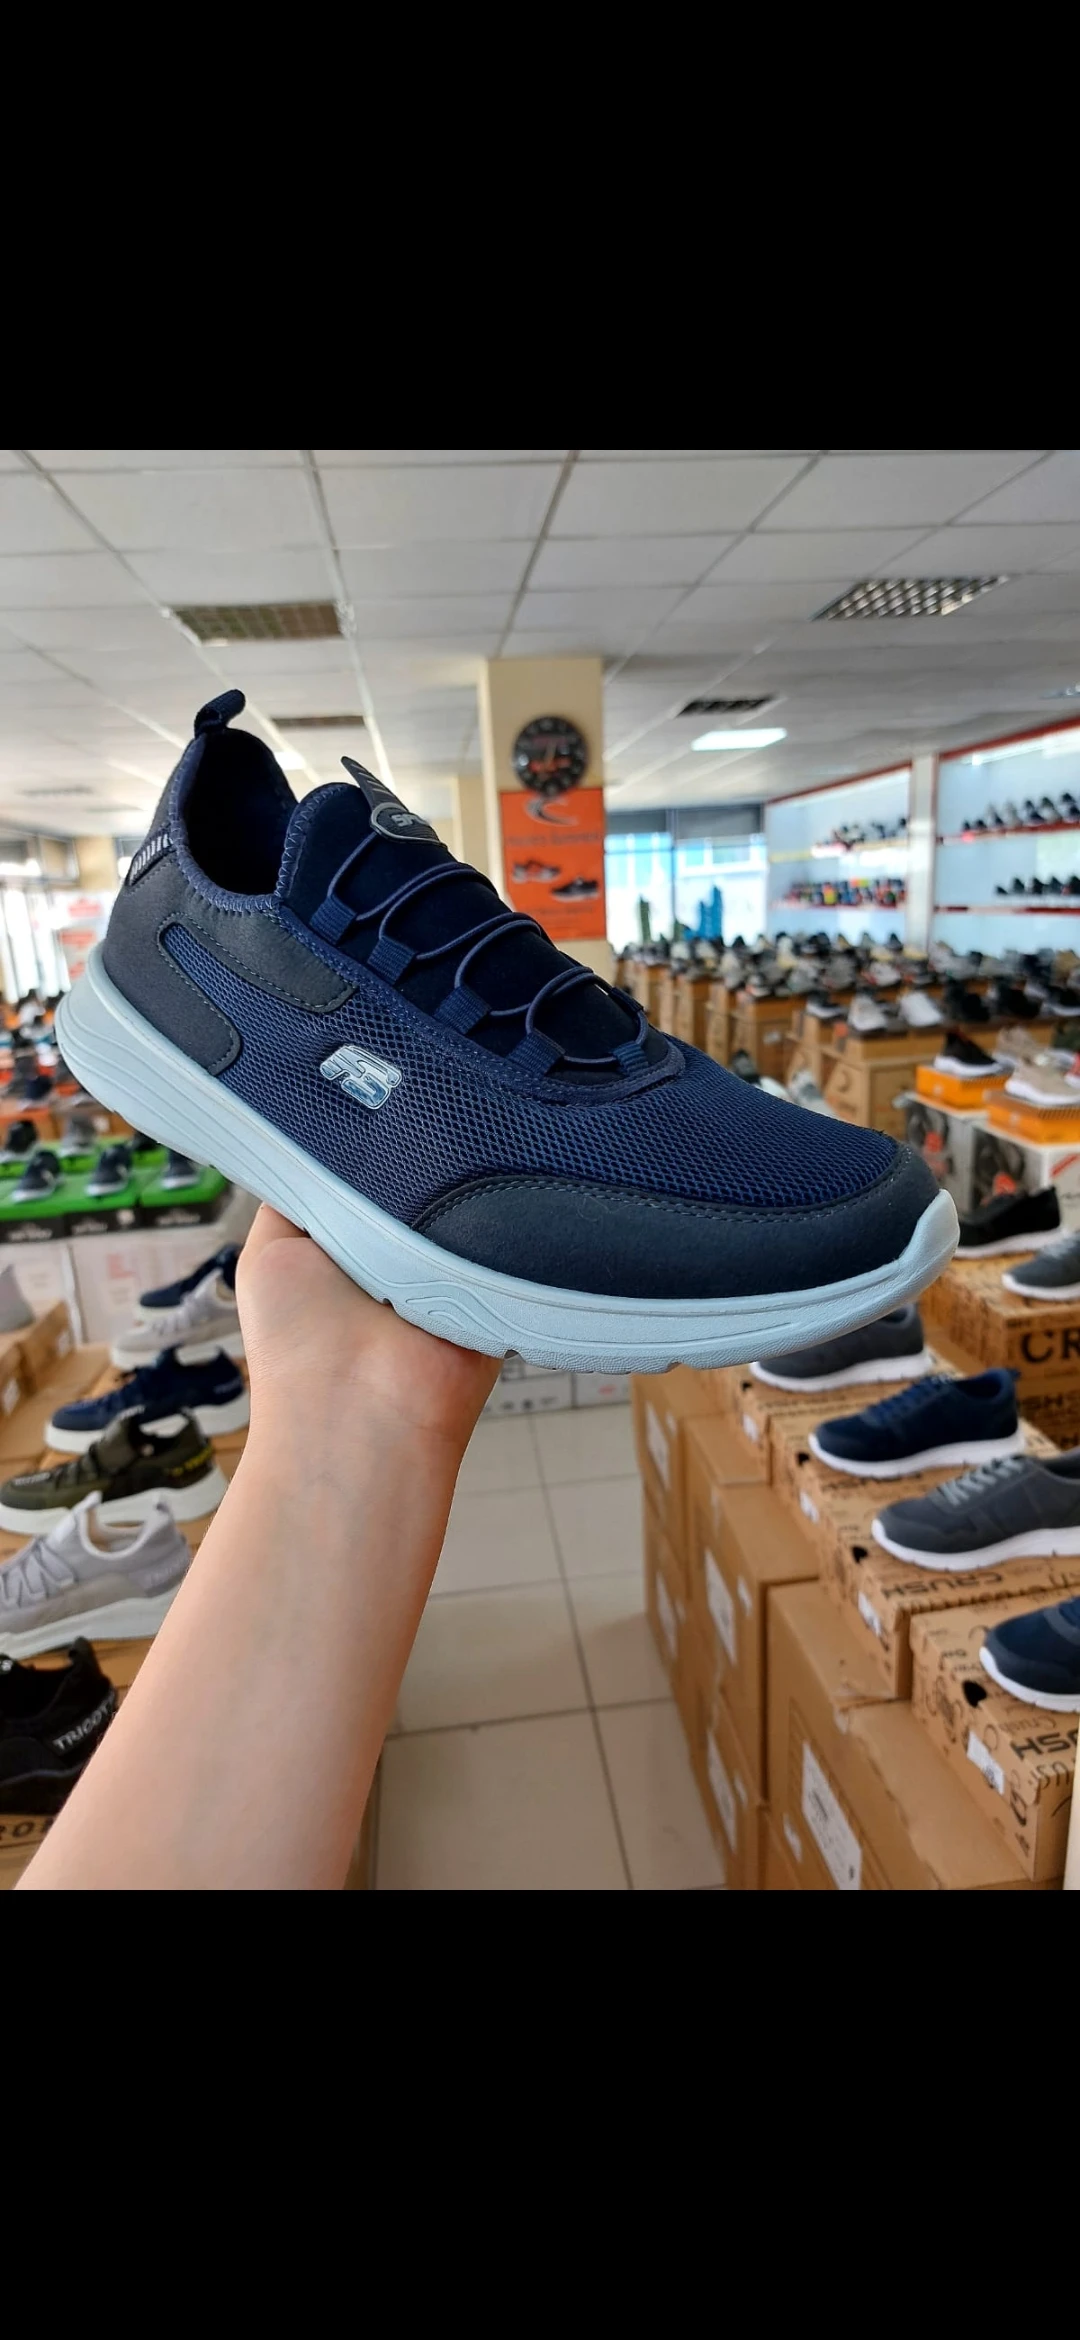 Men's Navy Blue Orthopedic Sneakers Breathable High Quality Durable Modern New Season Luxury Fashionable For Hiking And Travel